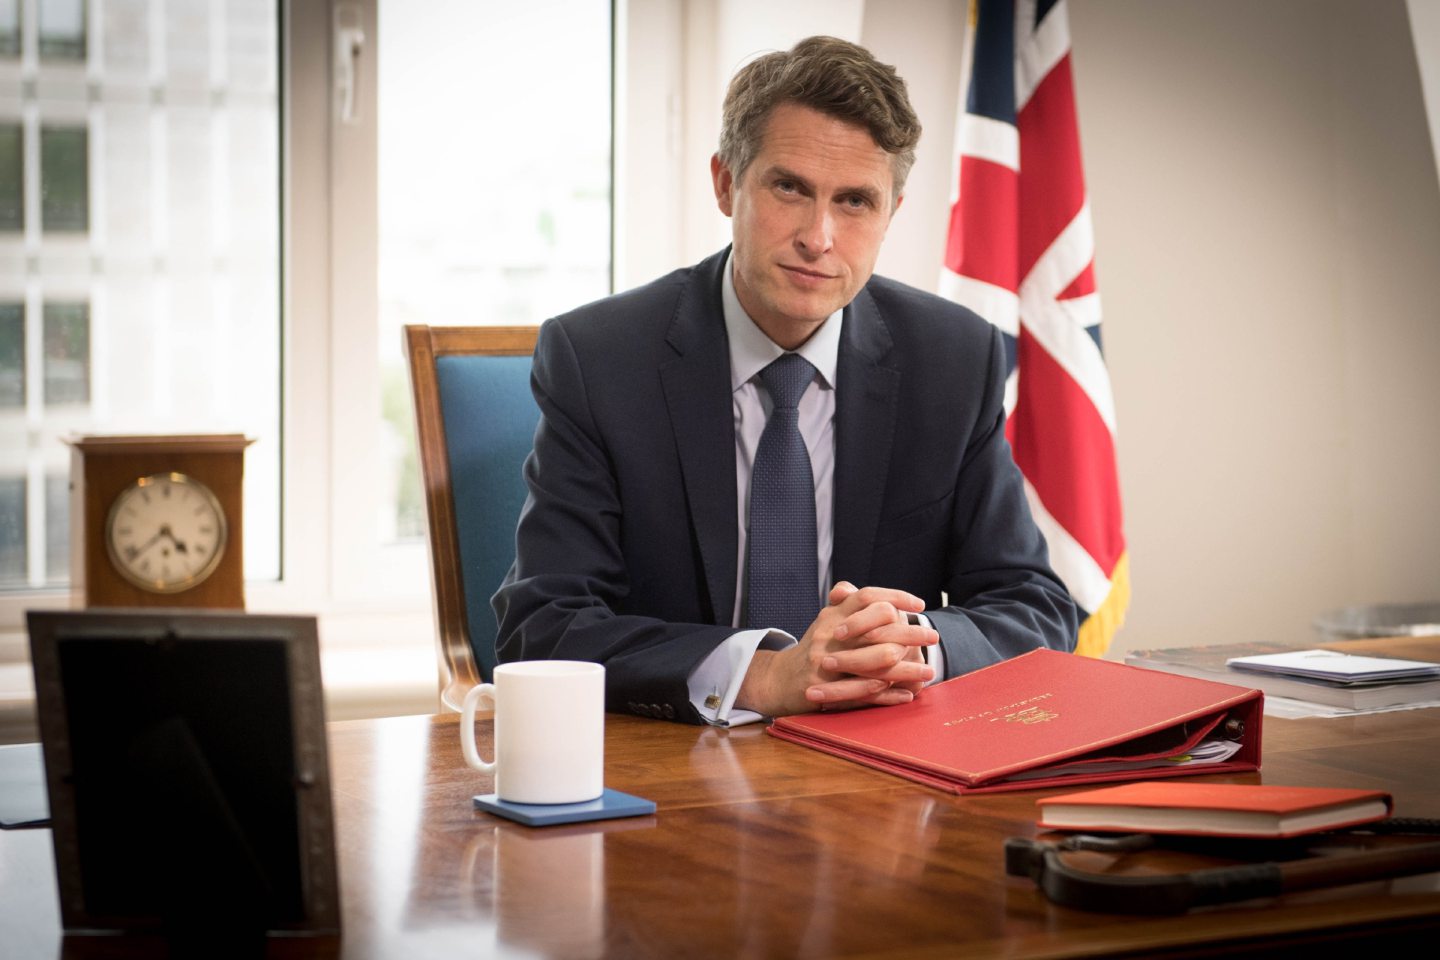 Gavin Williamson claimed to have had a lovely chat with Marcus Rashford when really he'd been on a call with Maro Itoje.